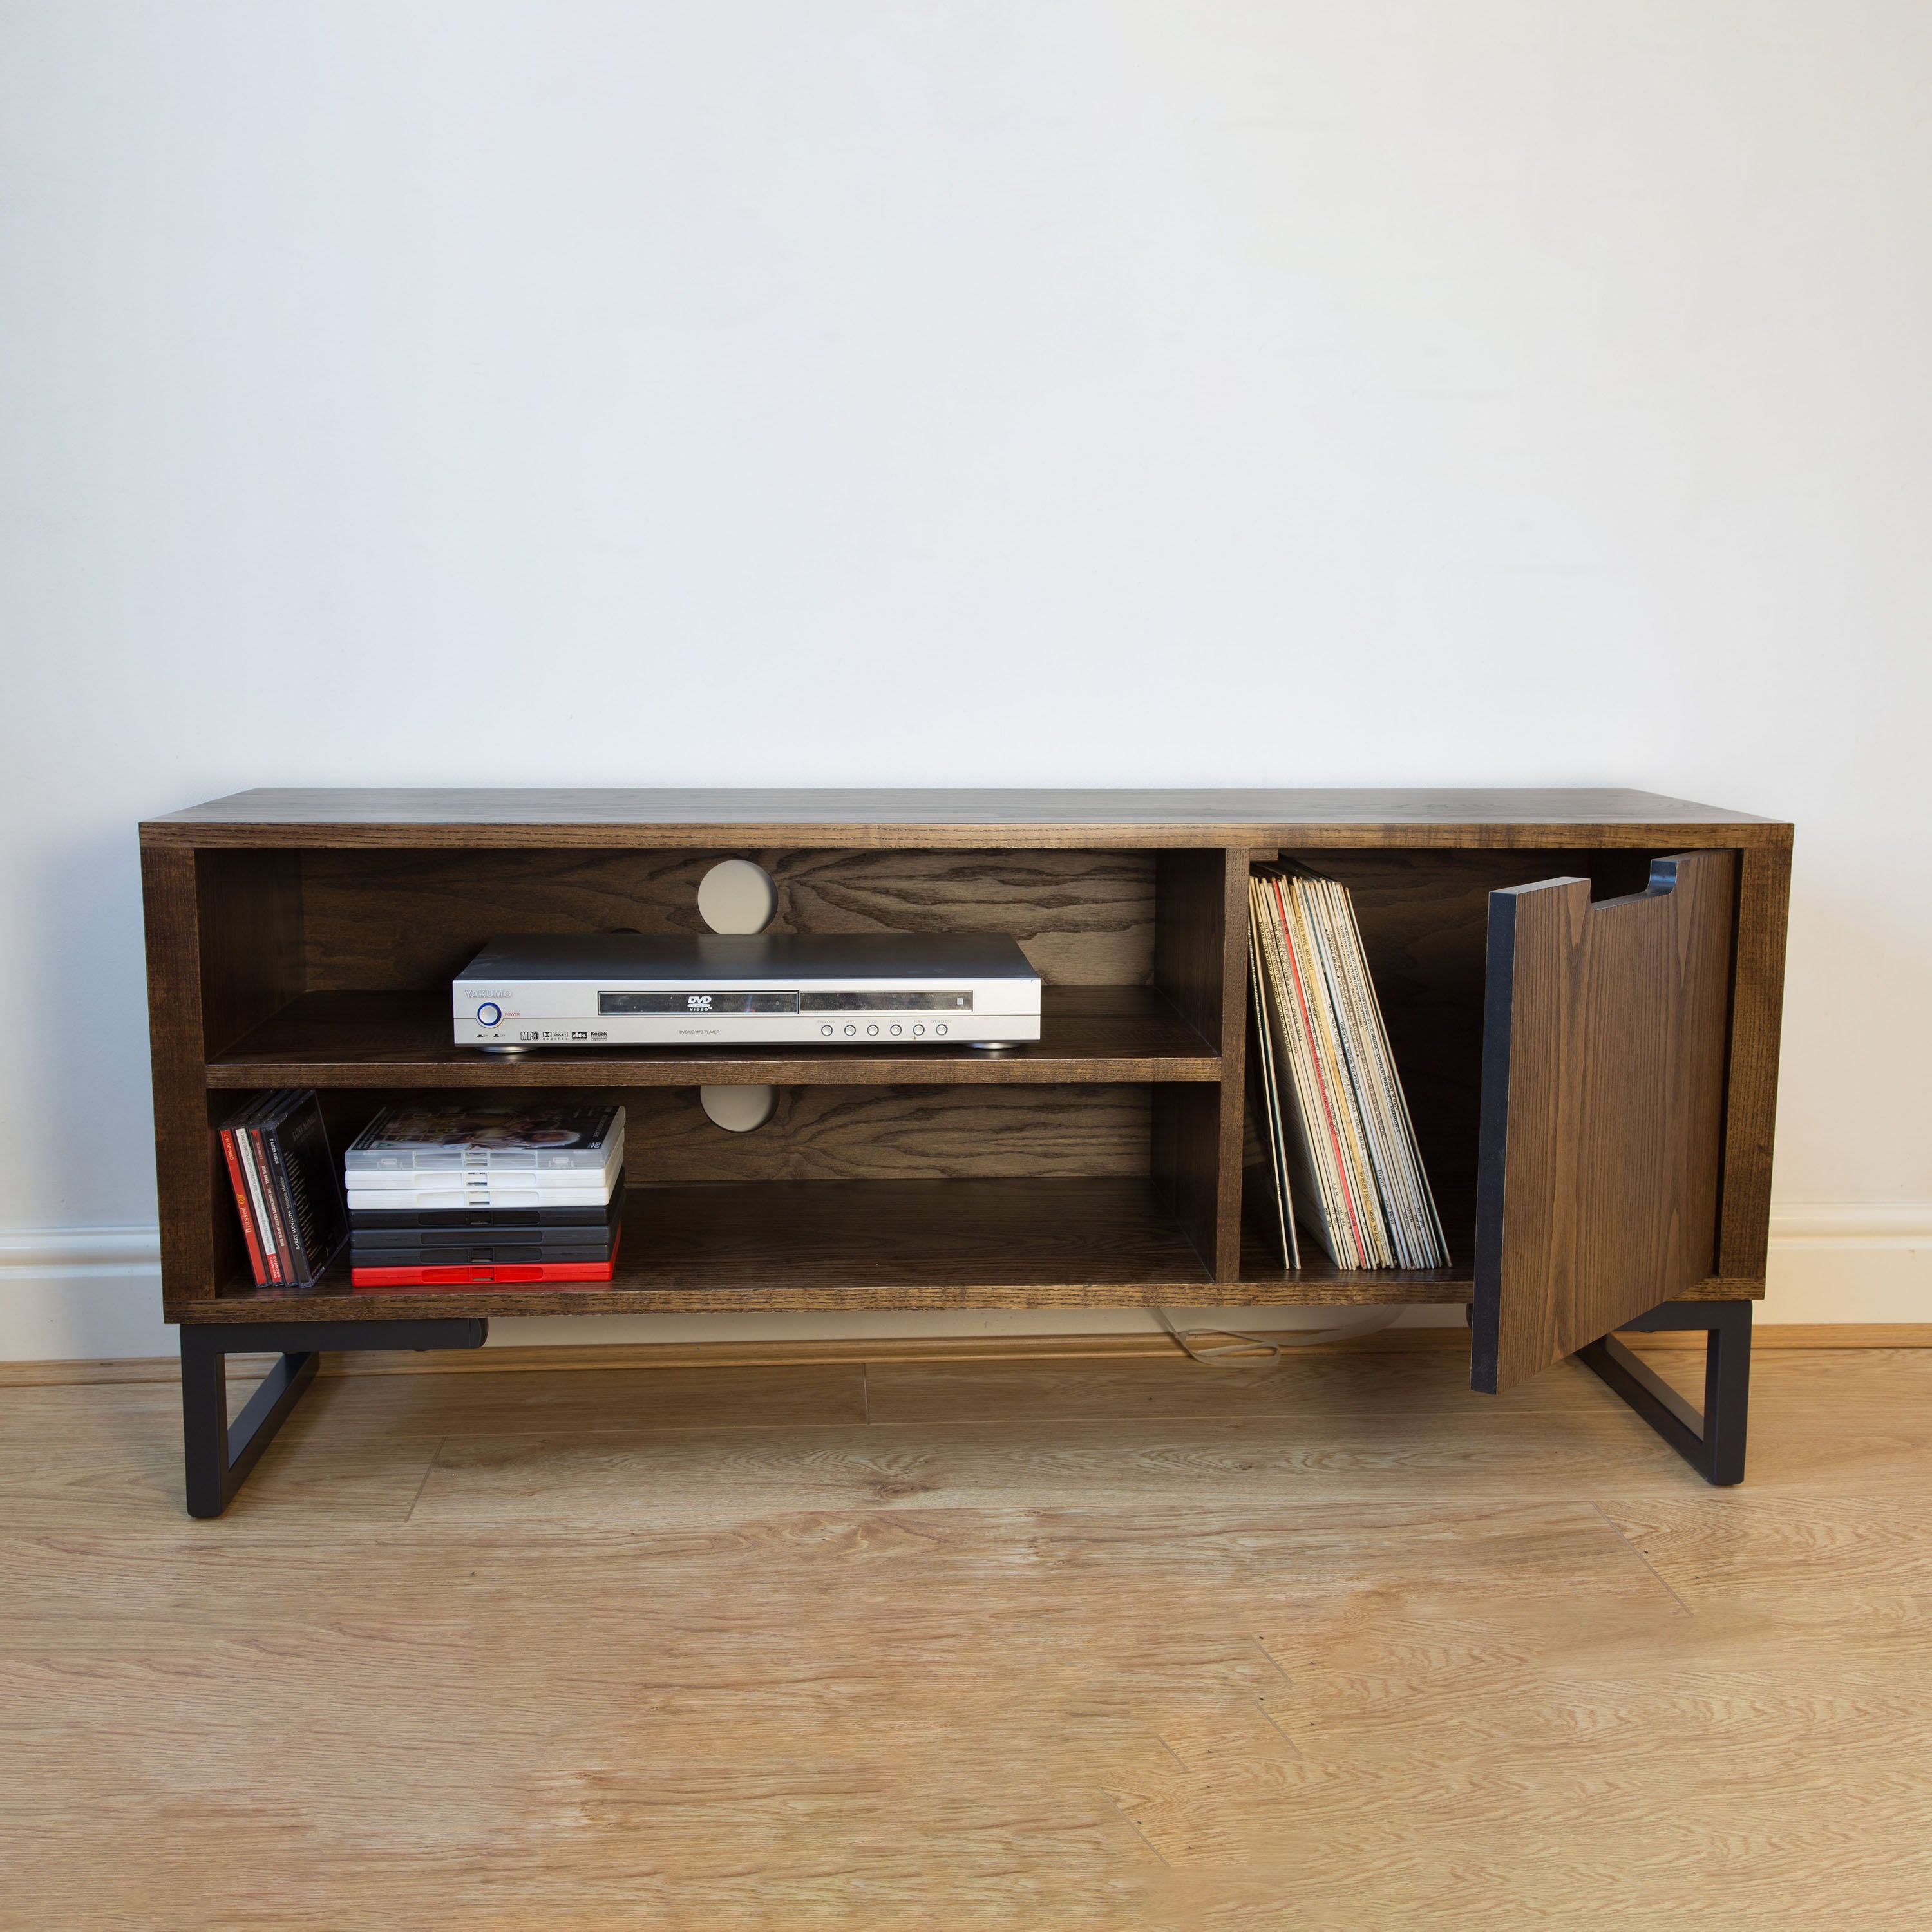 IN STOCK - Ashurst TV Stand in Dark Stained Ash 120cm/47" Wide